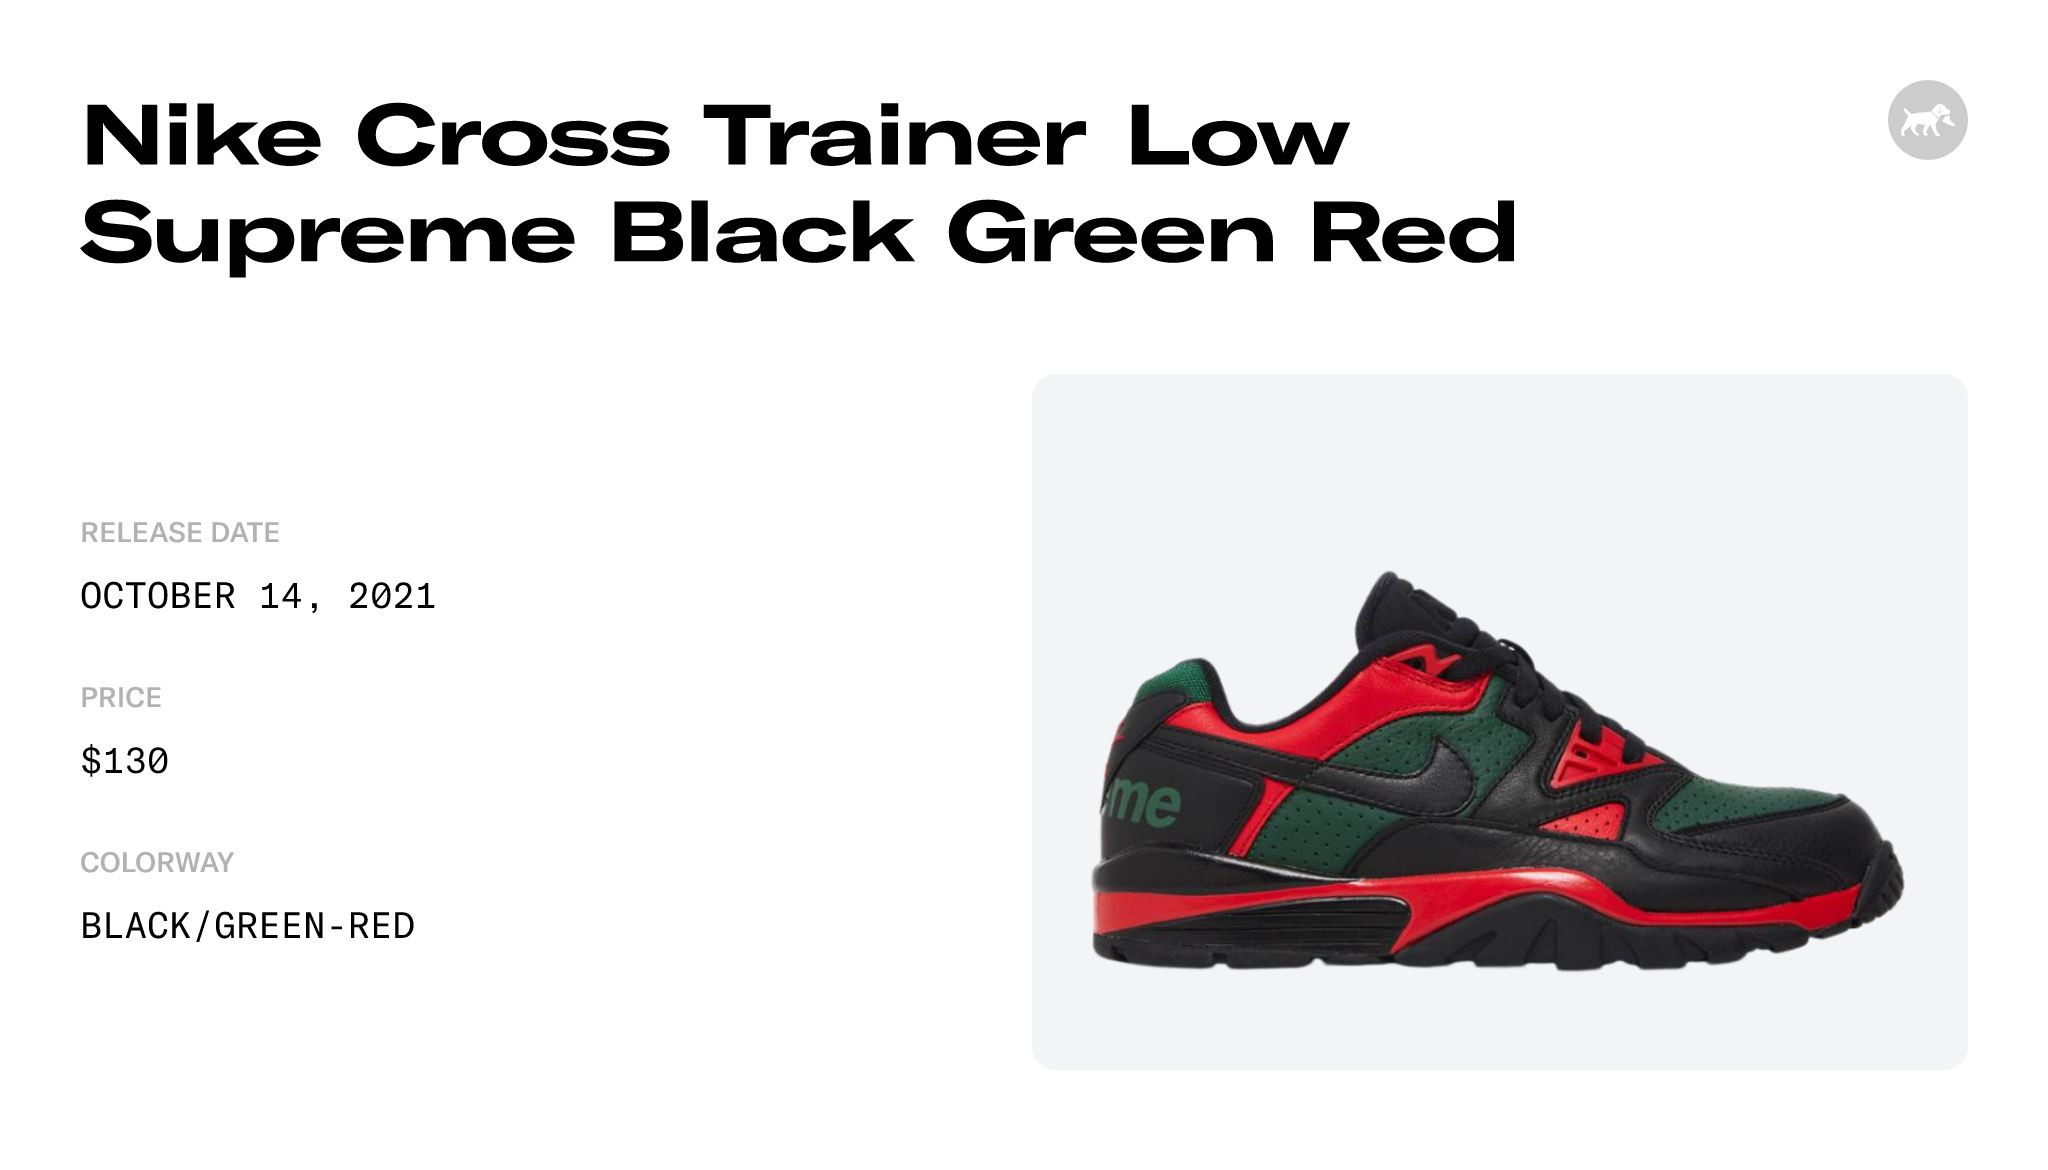 Nike Cross Trainer Low Supreme Black Green Red - CJ5291-001 Raffles and  Release Date